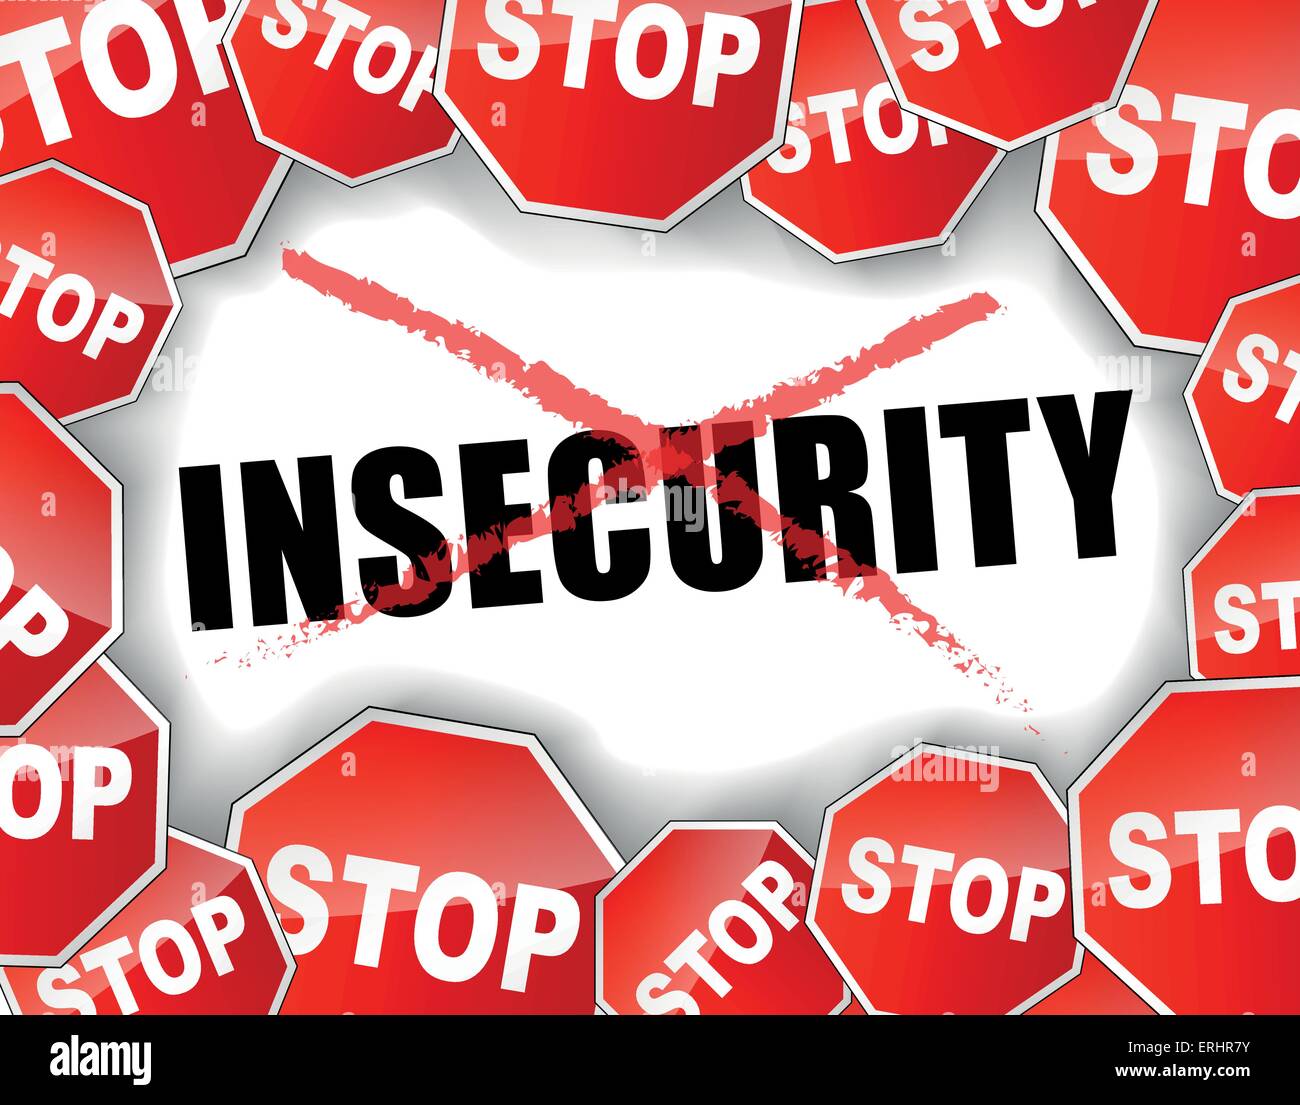 Vector illustration of stop insecurity concept background Stock Vector